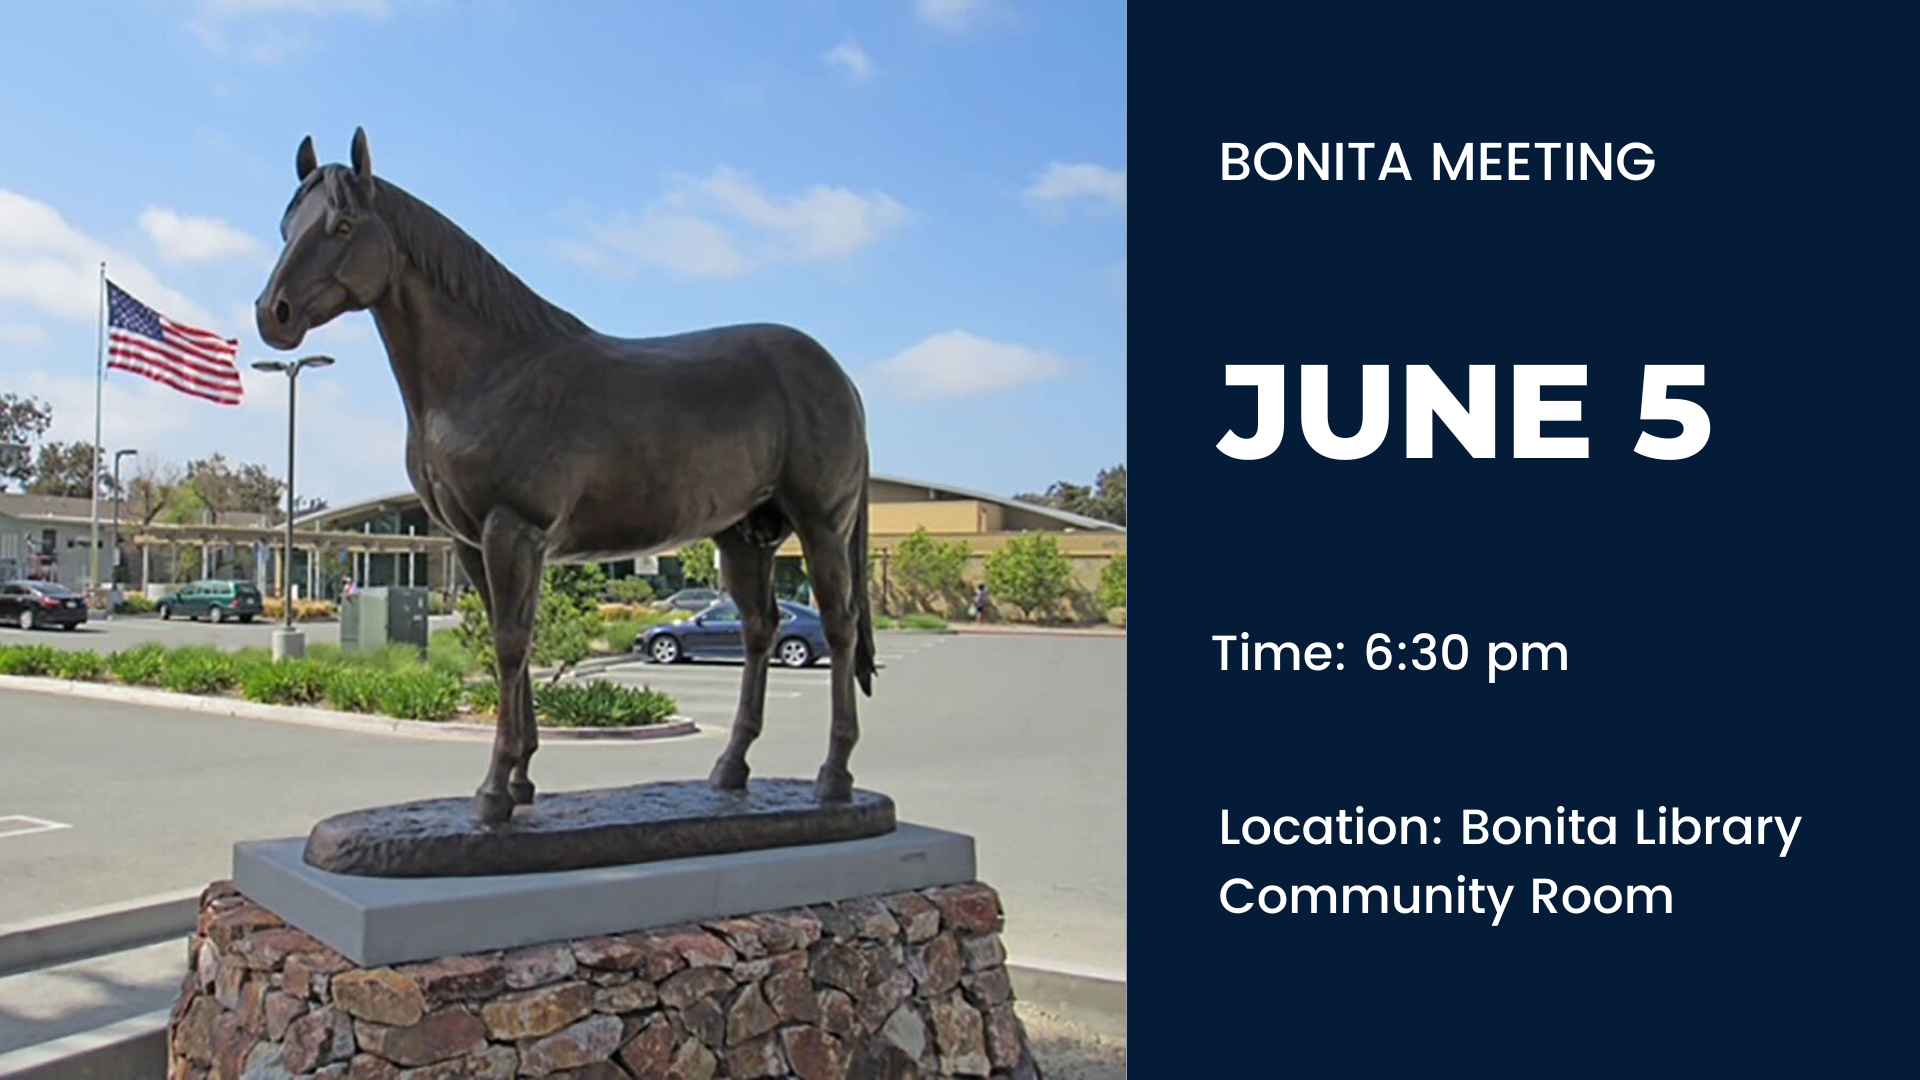 Please join the SVCA for their upcoming June 5 meeting to discuss news and important information on community topics. Read more.